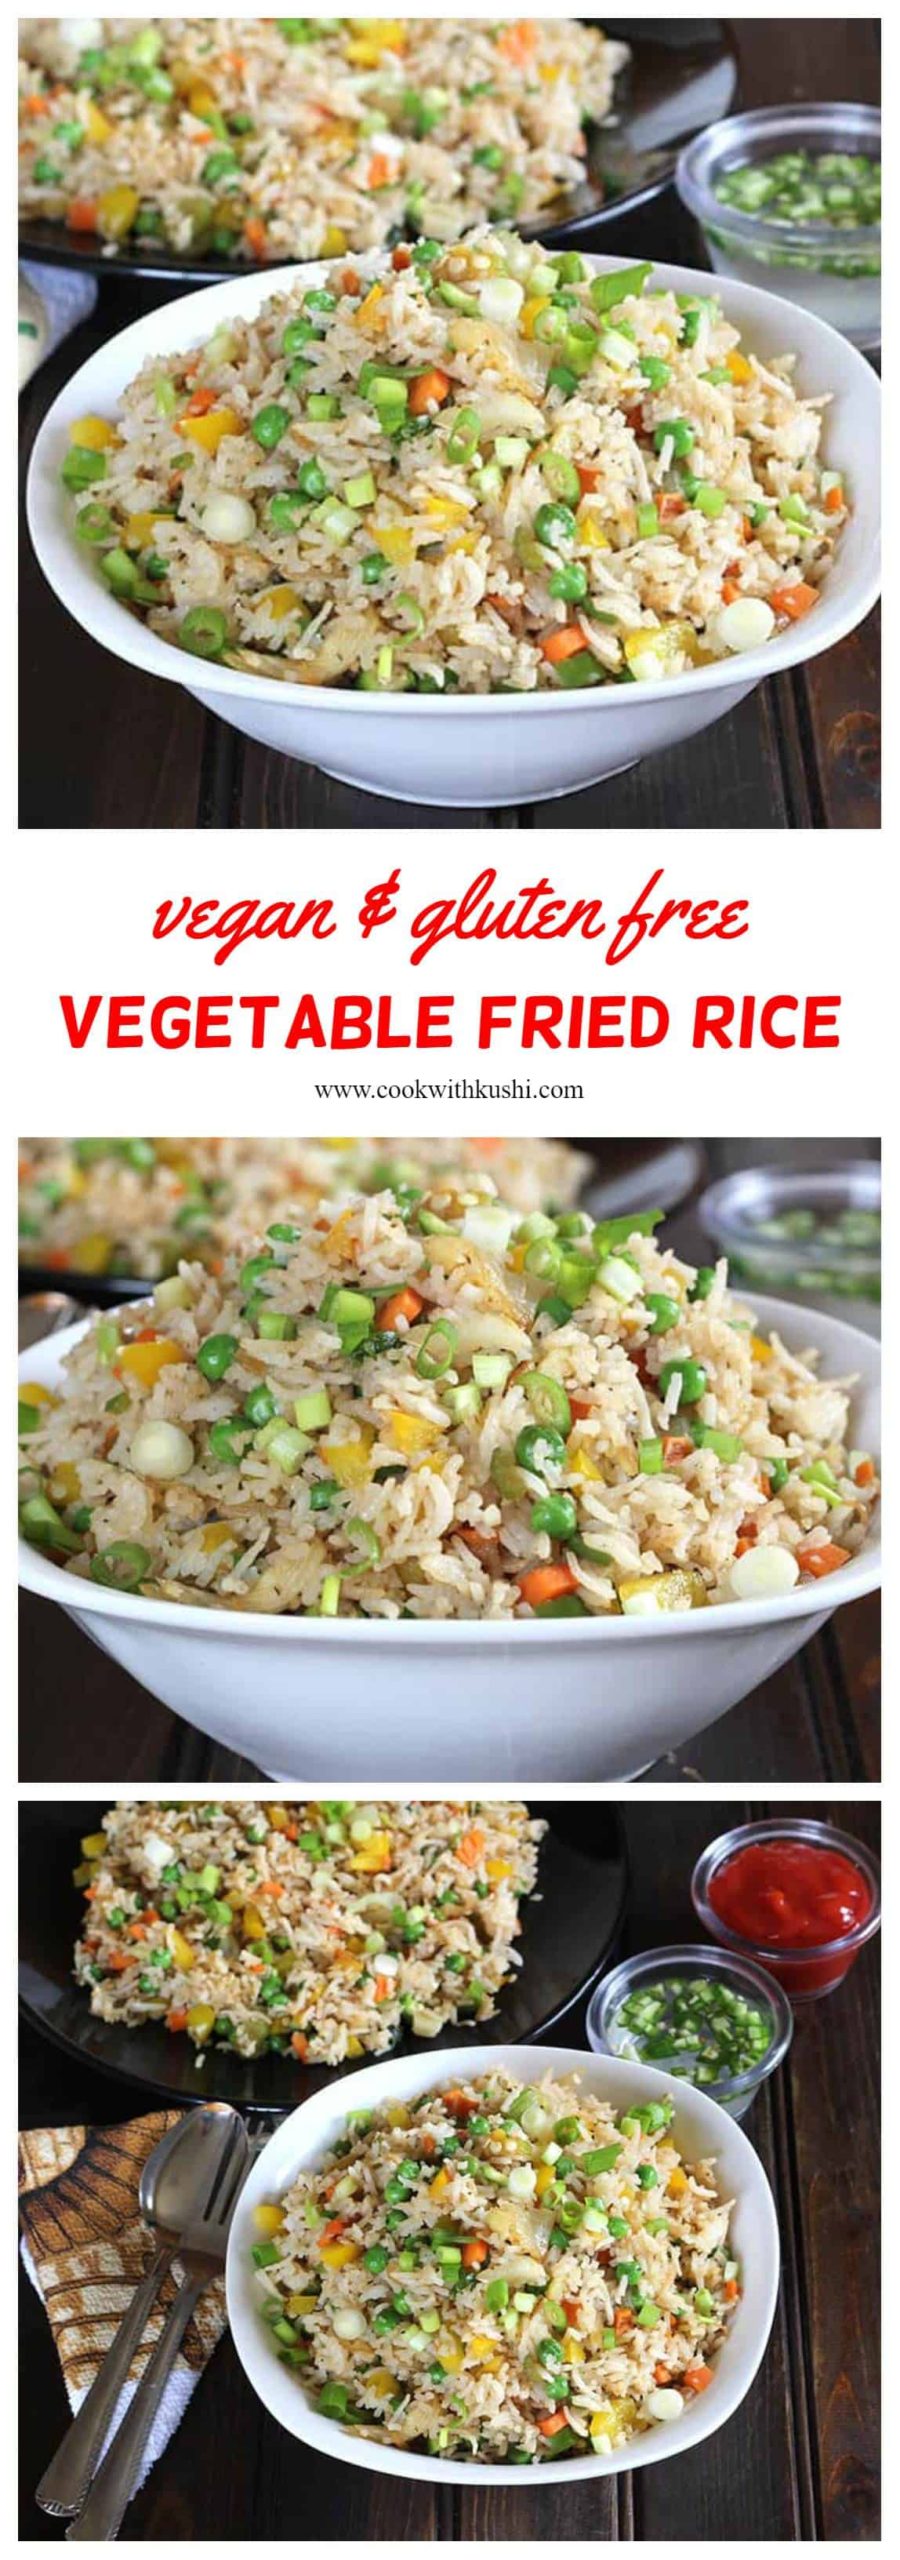 Indo Chinese Fried Rice or Vegetable Fried Rice or Veg Fried Rice is a quick and easy to make, flavorful rice recipe prepared using vegetables of your choice in less than 30 minutes. #vegfriedrice #veggiefriedrice #insatntpotfriedrice #chickenfriedrice #beeffriedrice #baconfriedrice #insatntpotfriedrice #ketofriedrice #veganfriedrice #chinesefriedrice #dinnerideas #dinnerrecipes #lunchboxrecipes #instantpotrecipes #indochineserecipes 